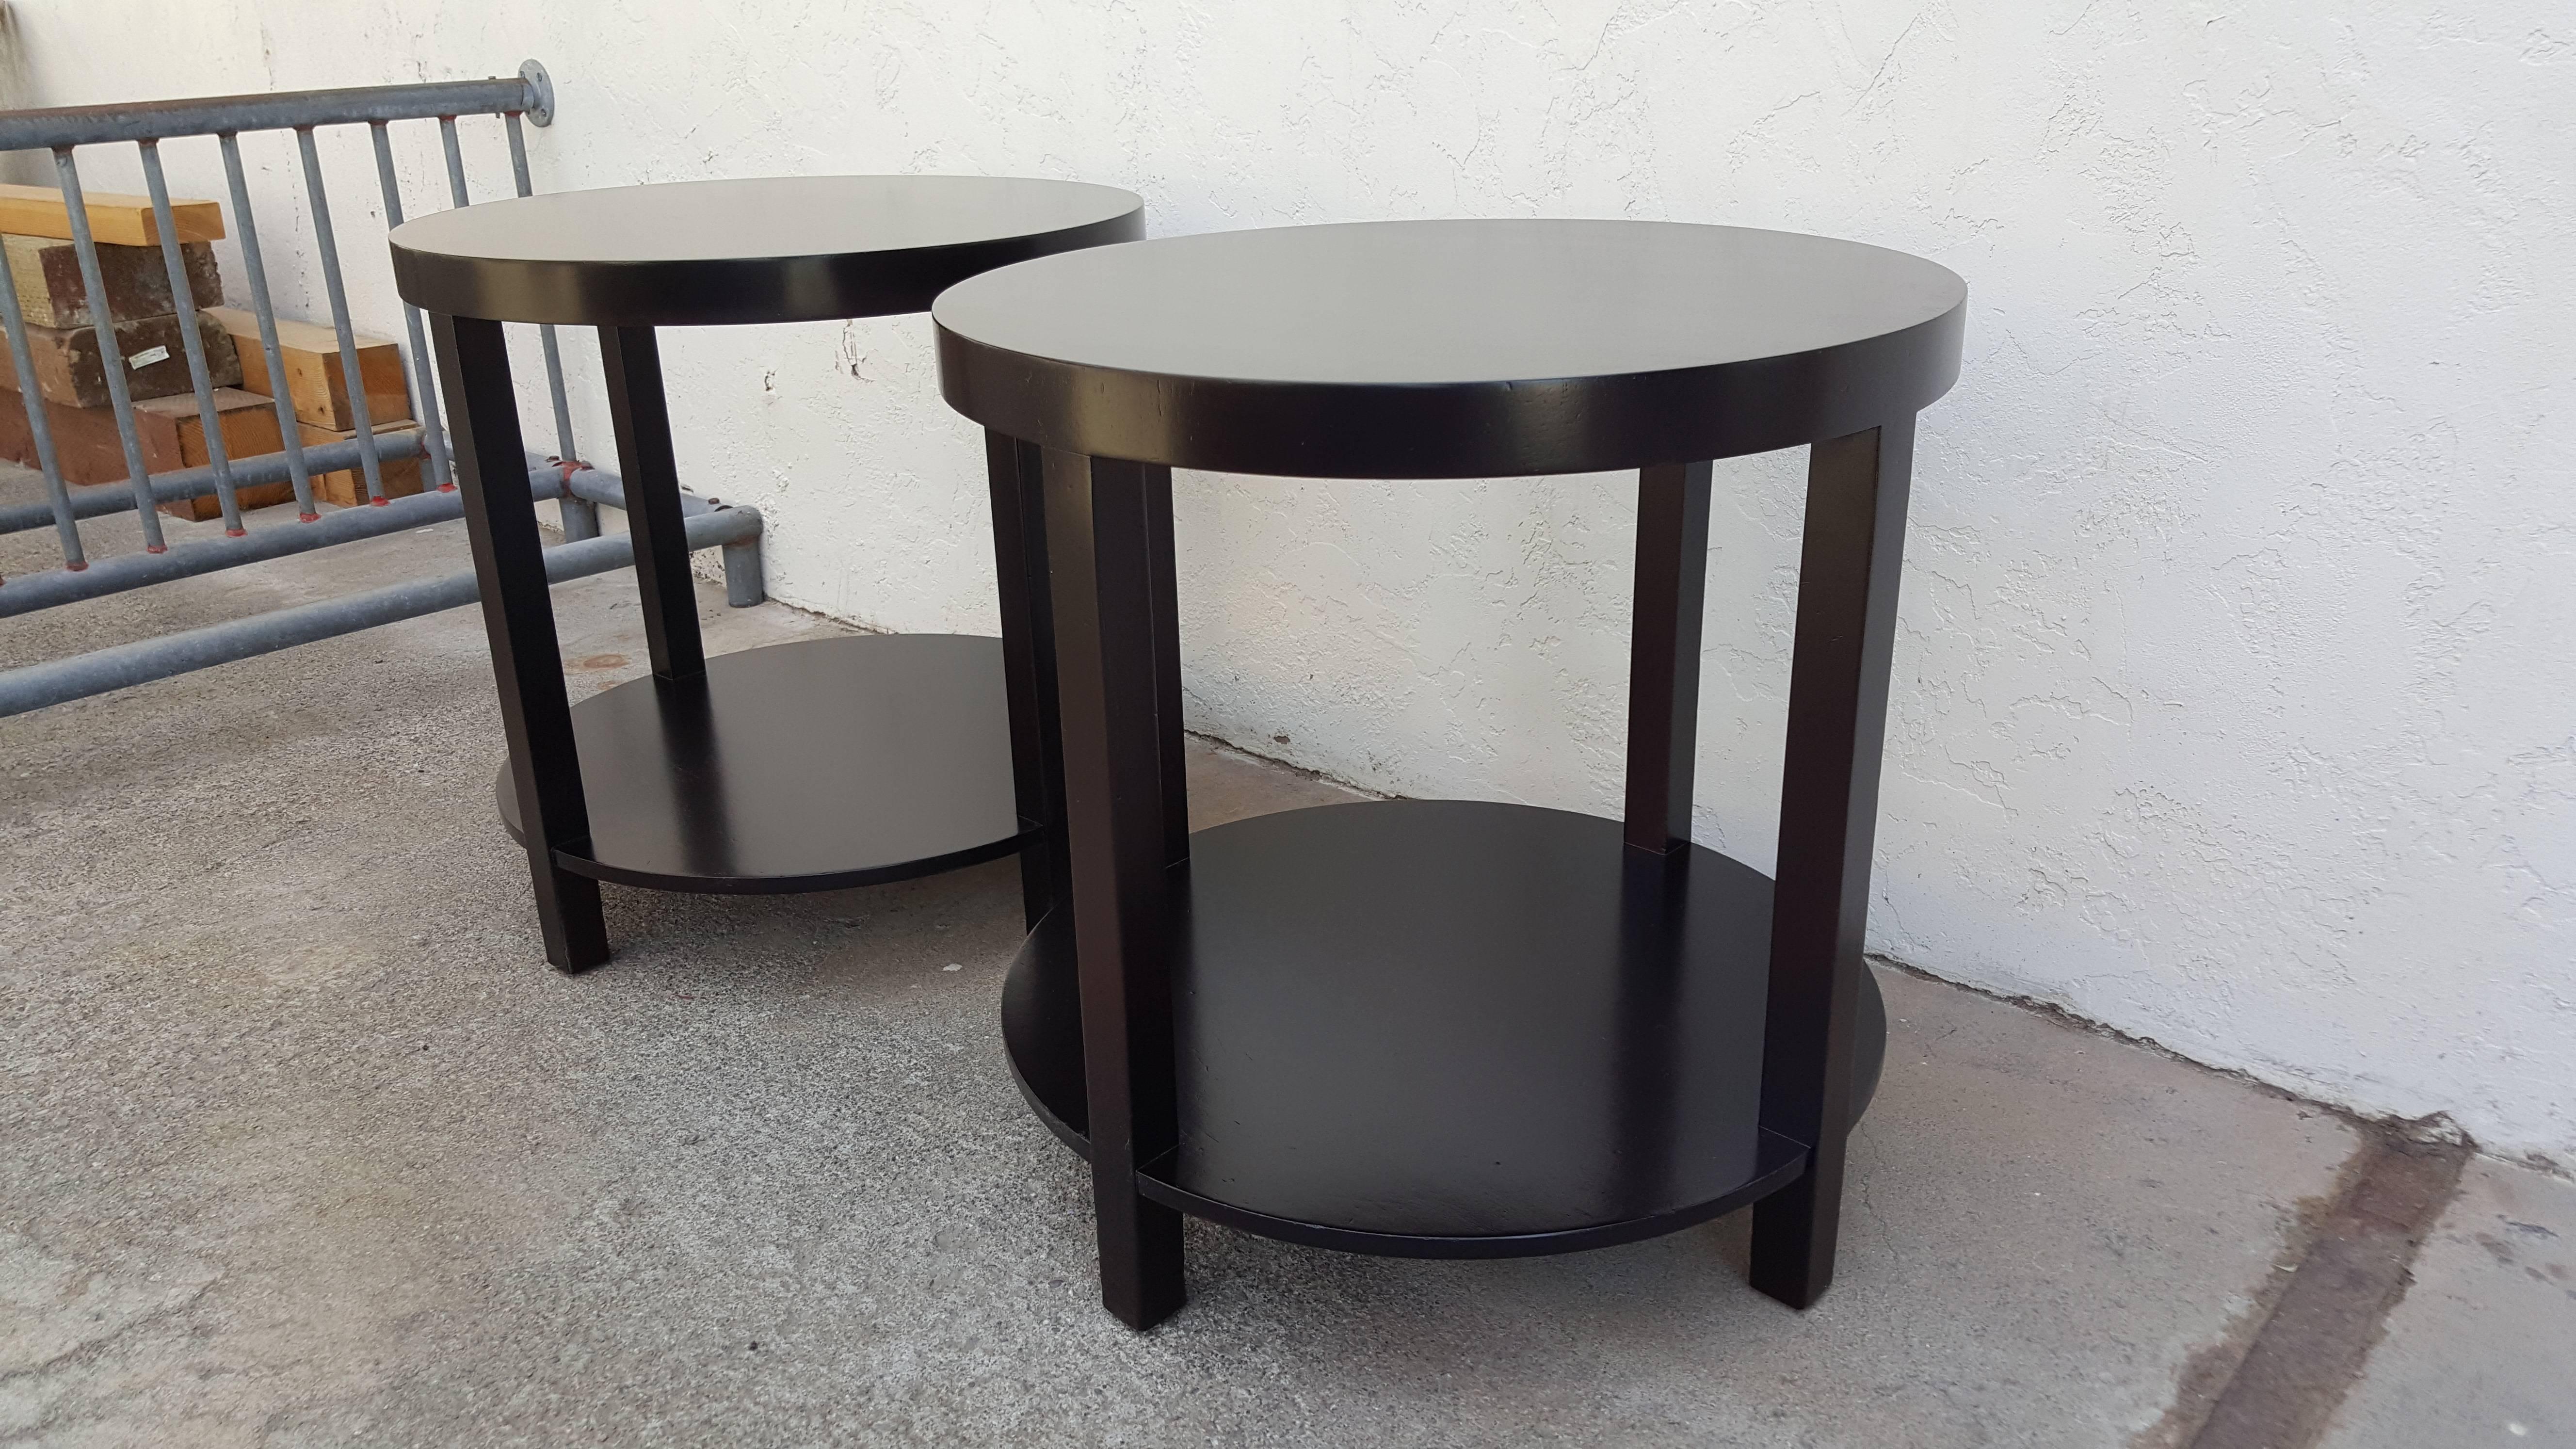 A pair of circular end tables designed by Robsjohn-Gibbings for Widdicomb Furniture, circa 1950s. Refinished in a chocolate brown lacquer. Retaining Widdicomb label.